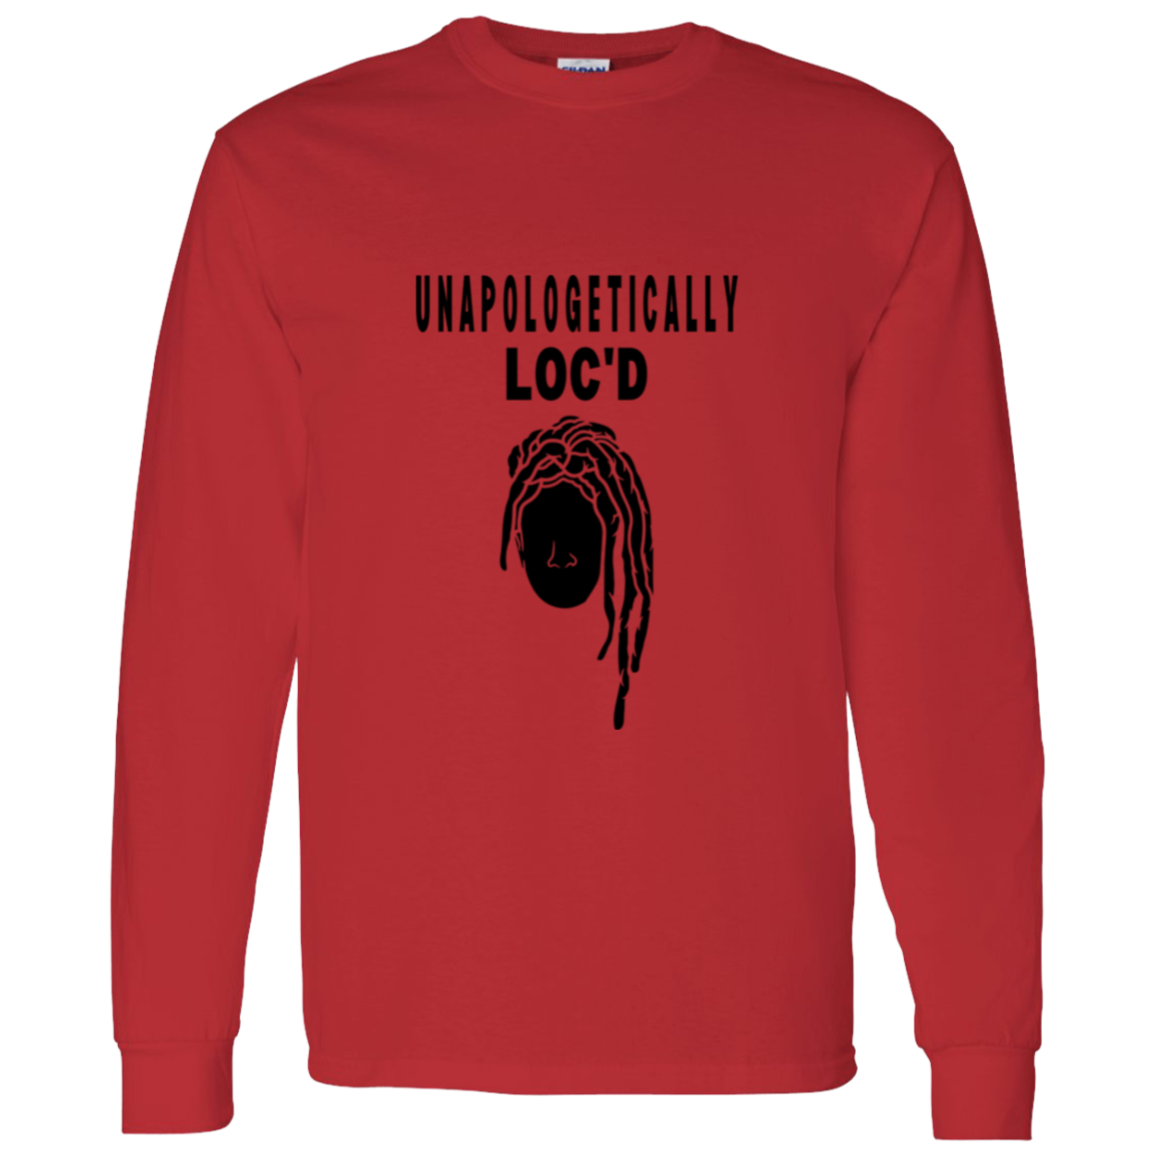 Unapologetically LOC'D - LS Shirt